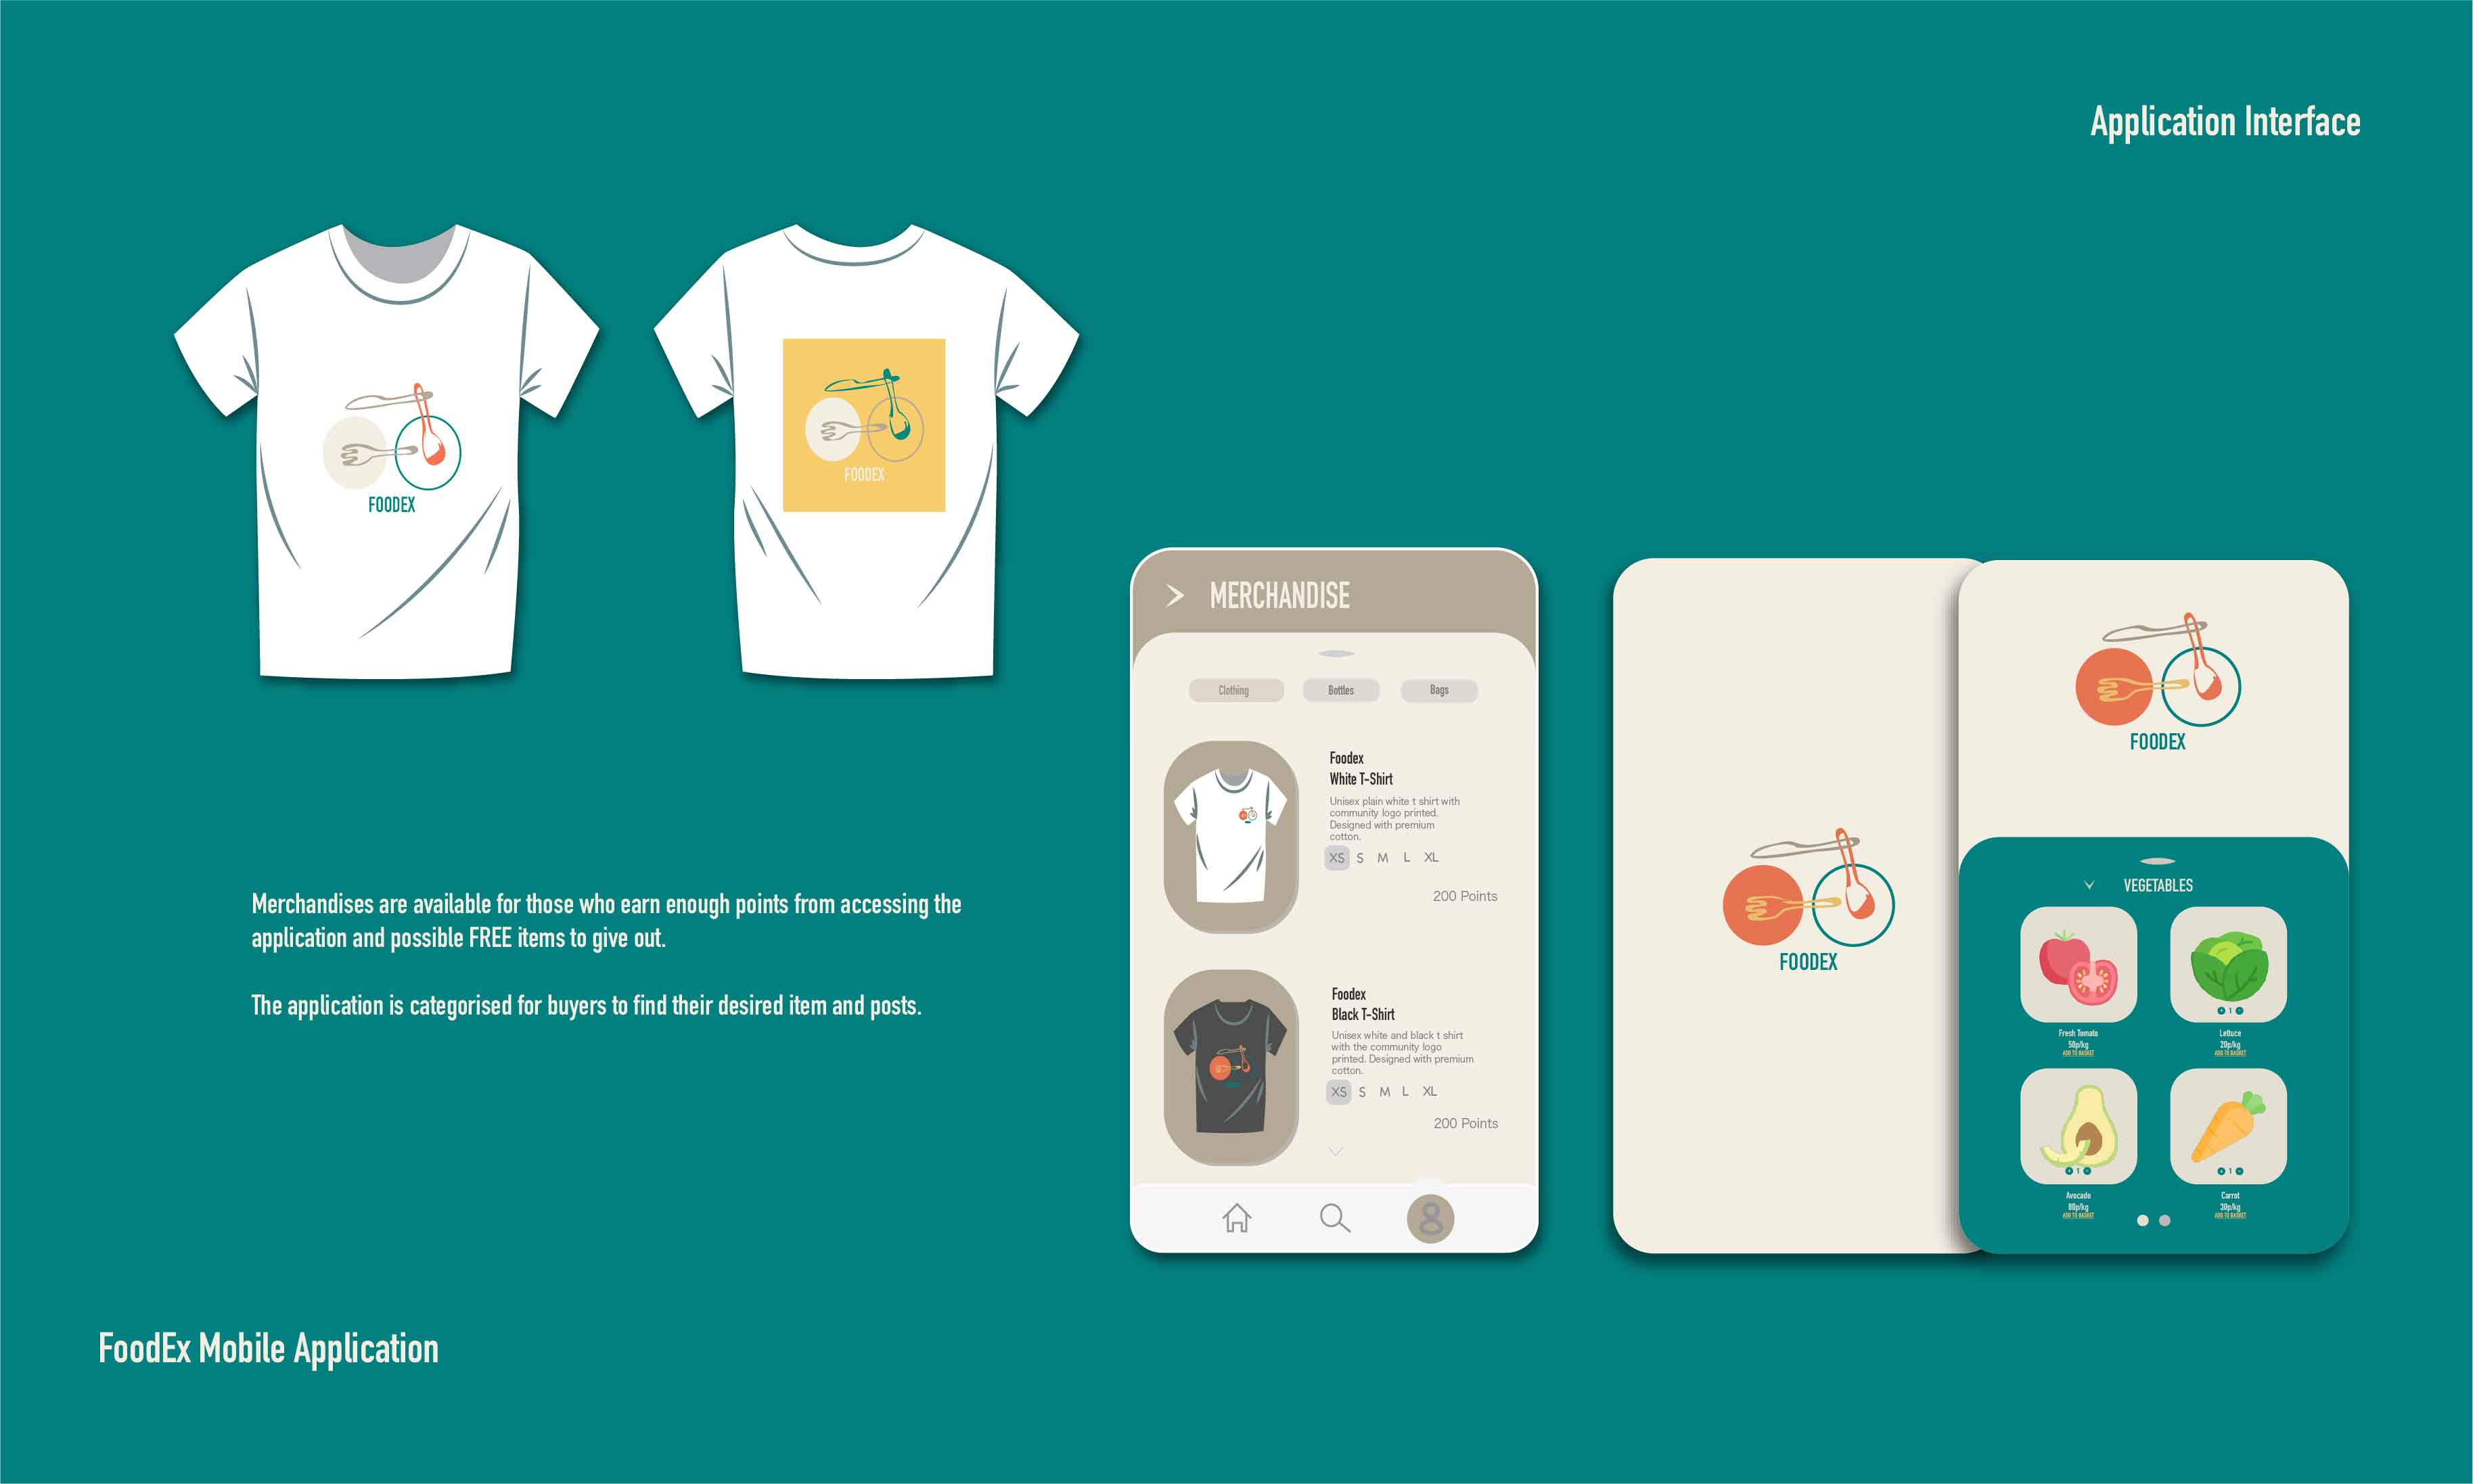 Application Interfaces and Merchandise